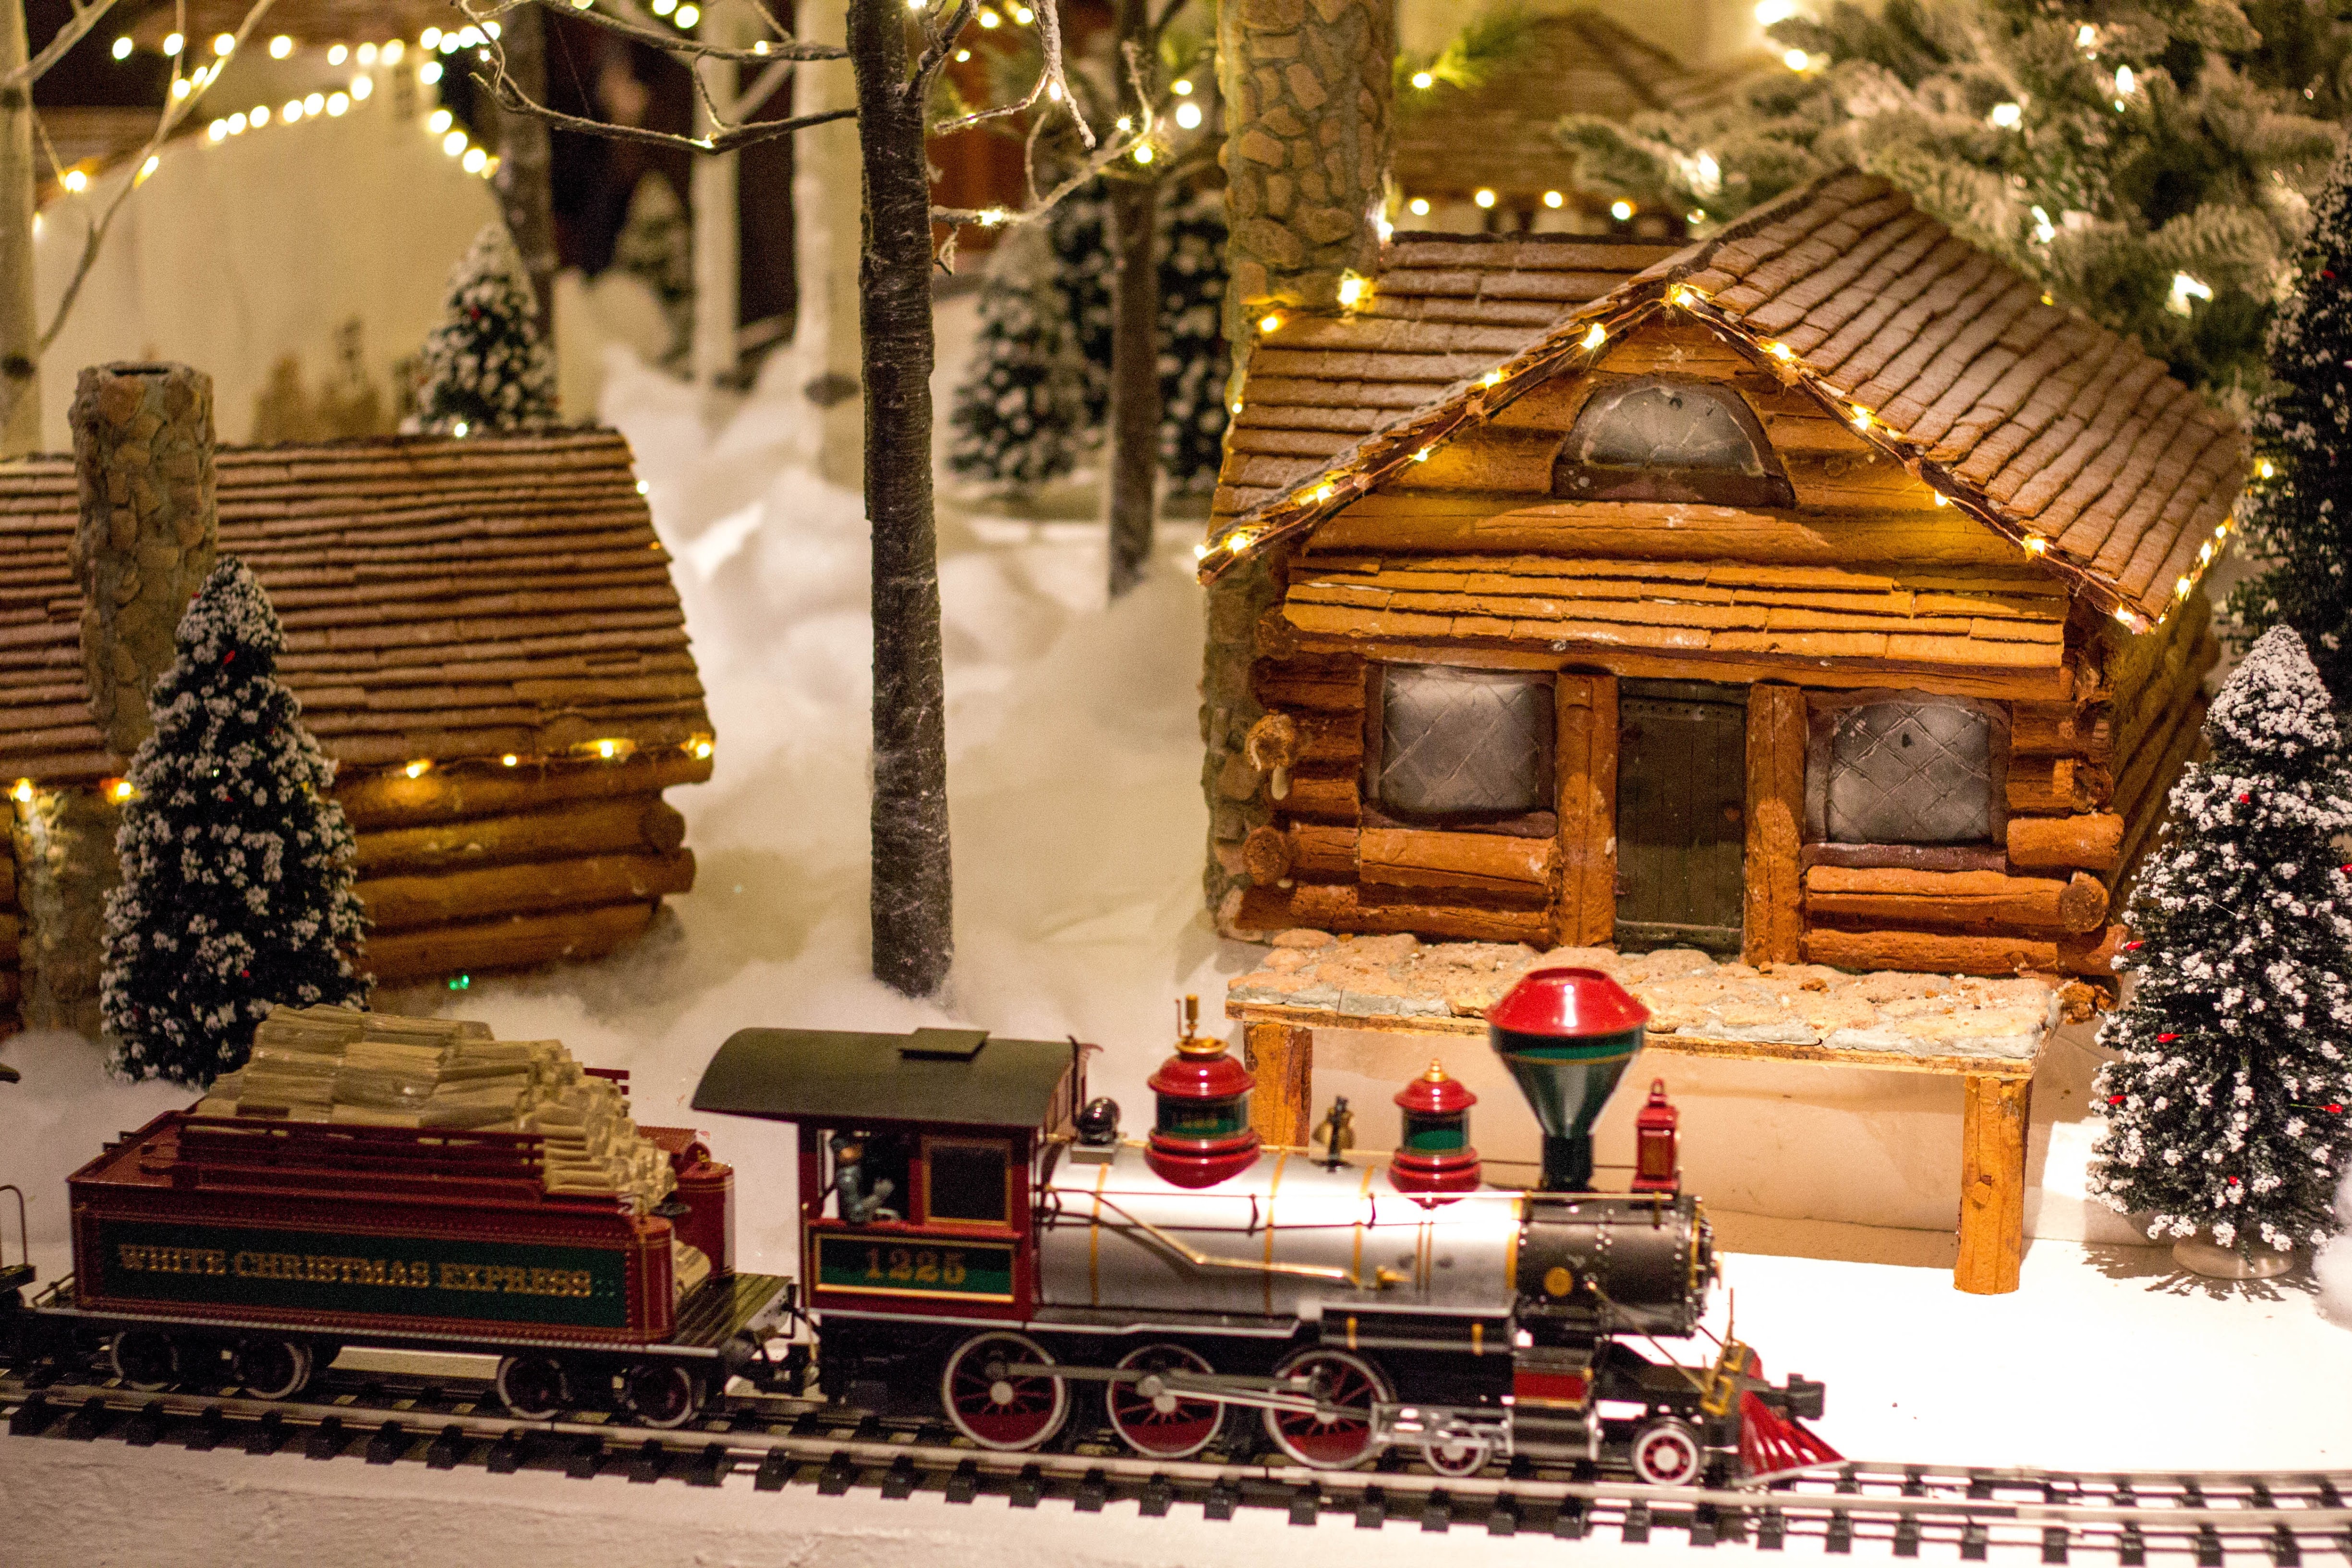 A train and Christmas decorations under a tree